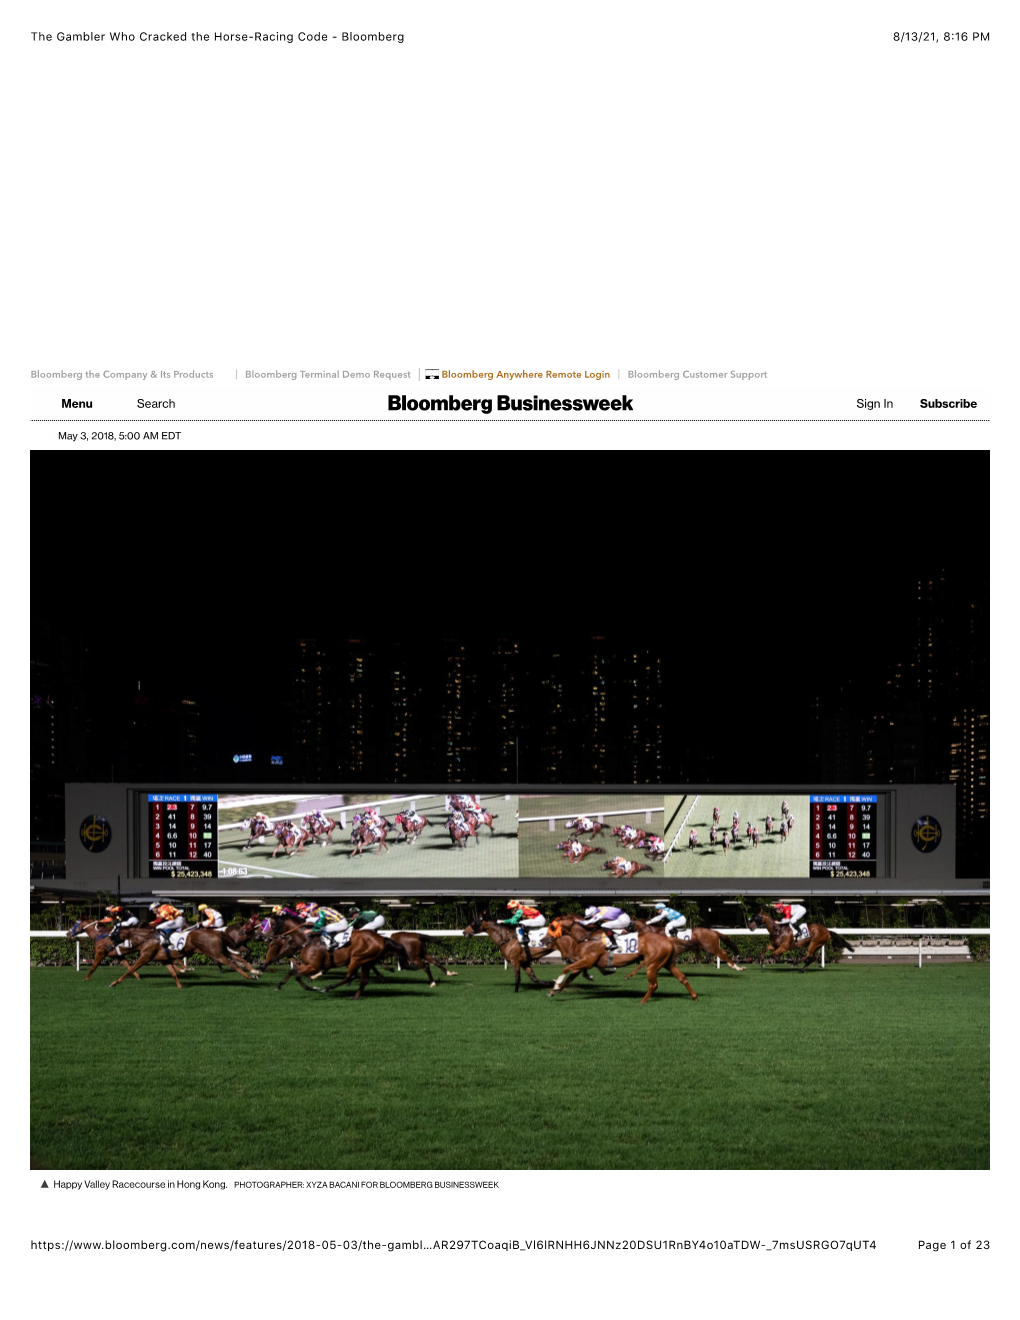 The Gambler Who Cracked the Horse-Racing Code - Bloomberg 8/13/21, 8:16 PM